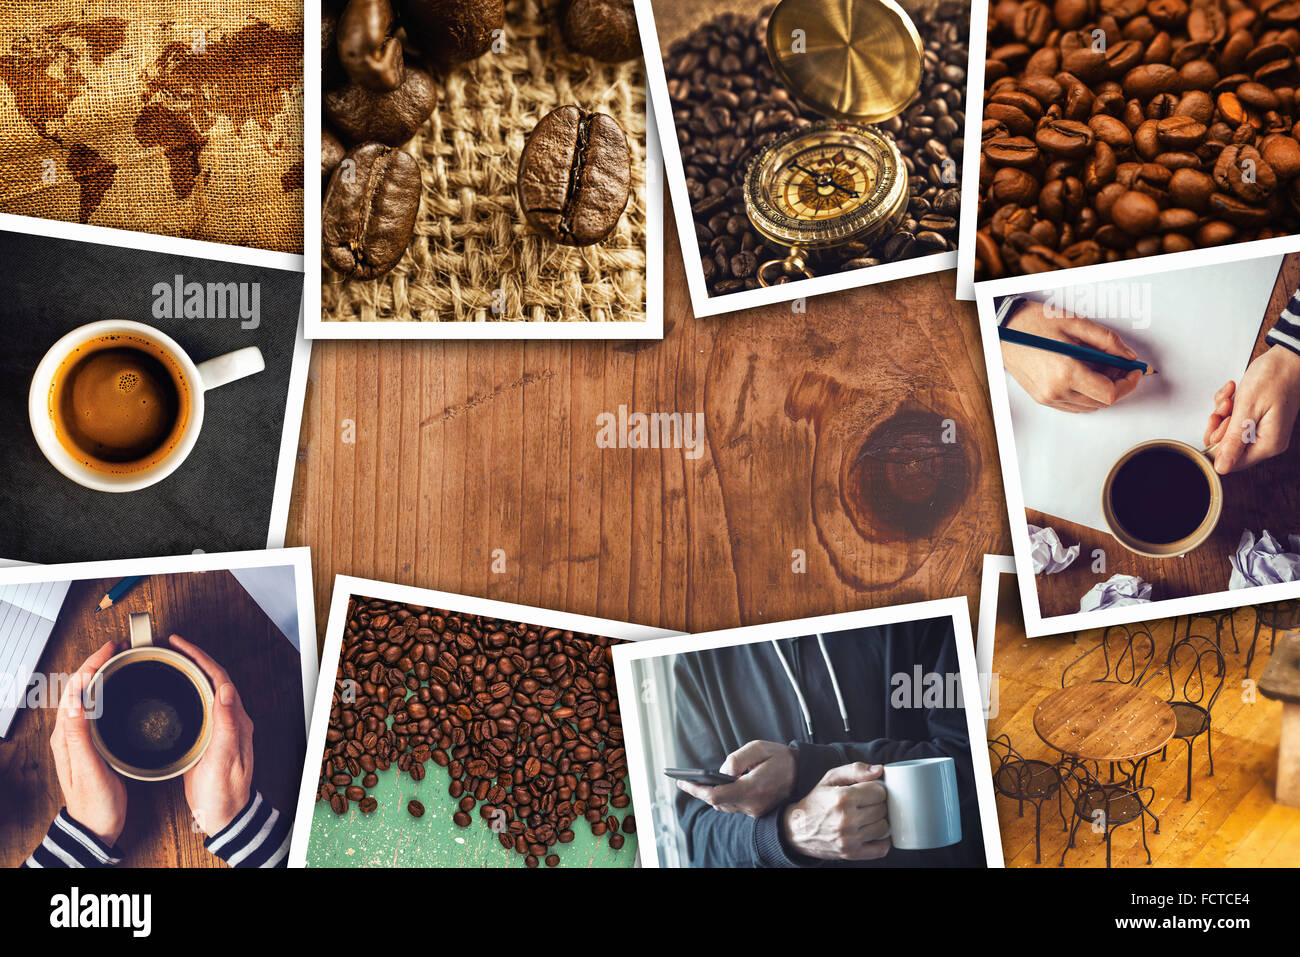 https://c8.alamy.com/comp/FCTCE4/coffee-photo-collage-on-wooden-cafe-table-as-copy-space-FCTCE4.jpg